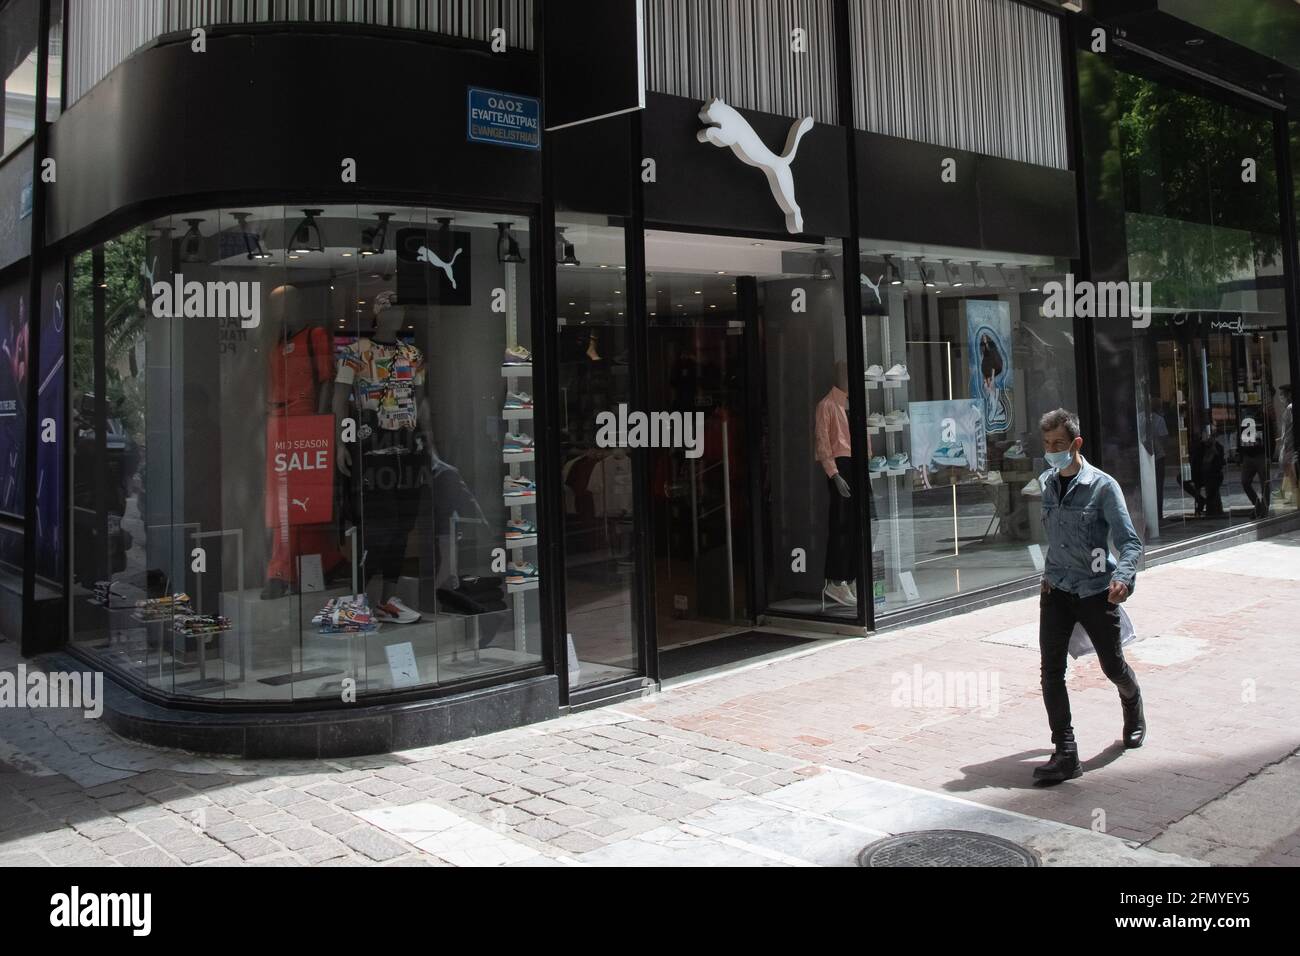 Athens, Greece. 12th May, 2021. A man wearing a face mask walks past a Puma  store